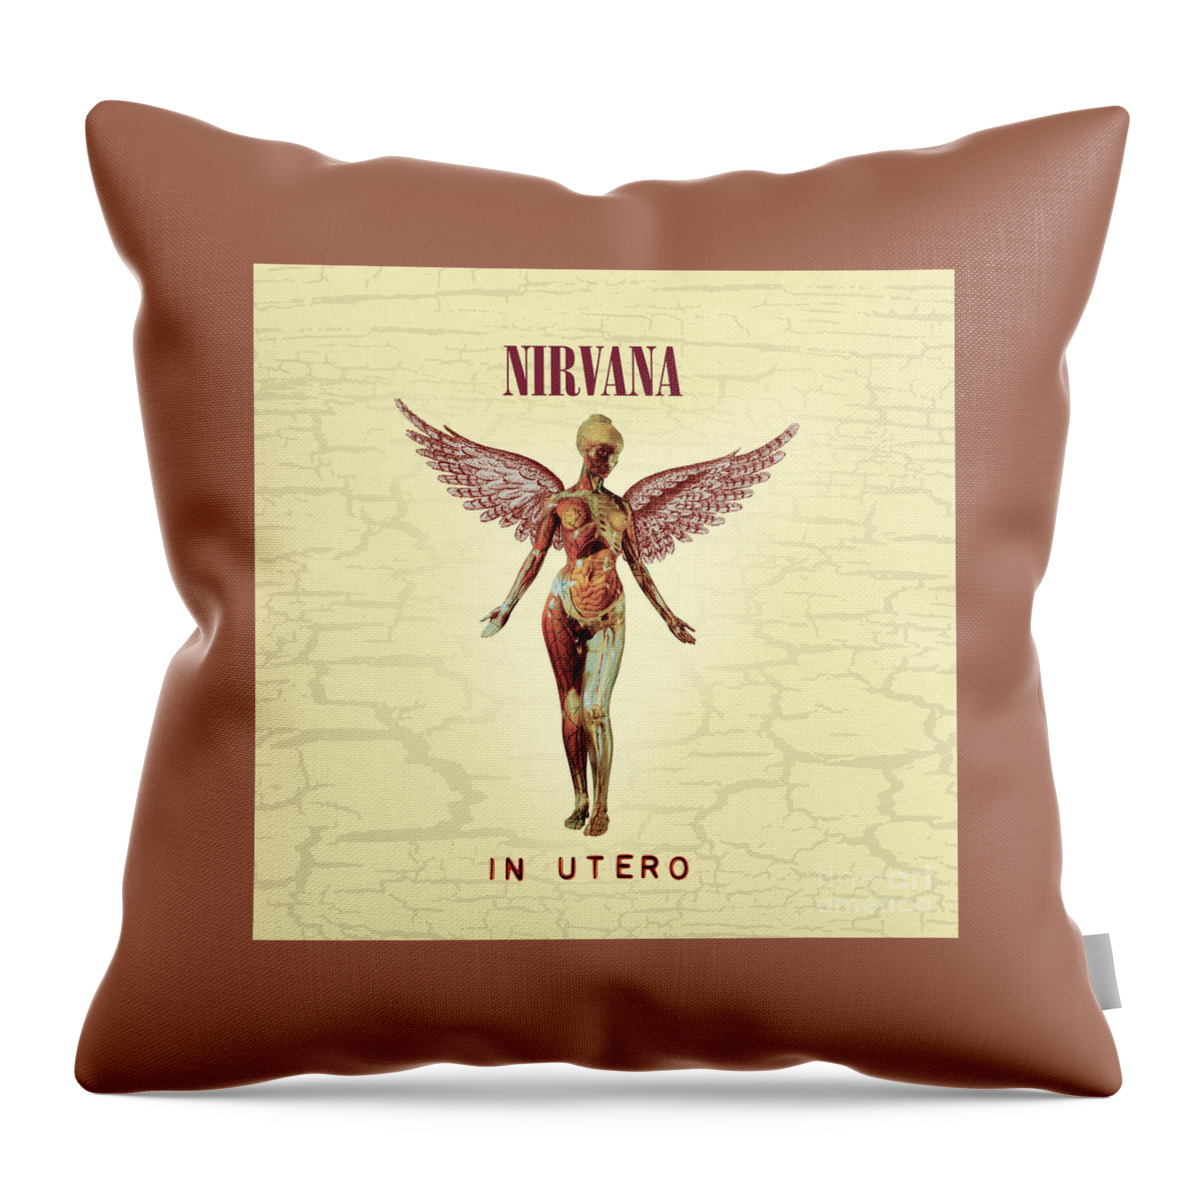 Nirvana Throw Pillow featuring the photograph Nirvana Utero album cover by Action